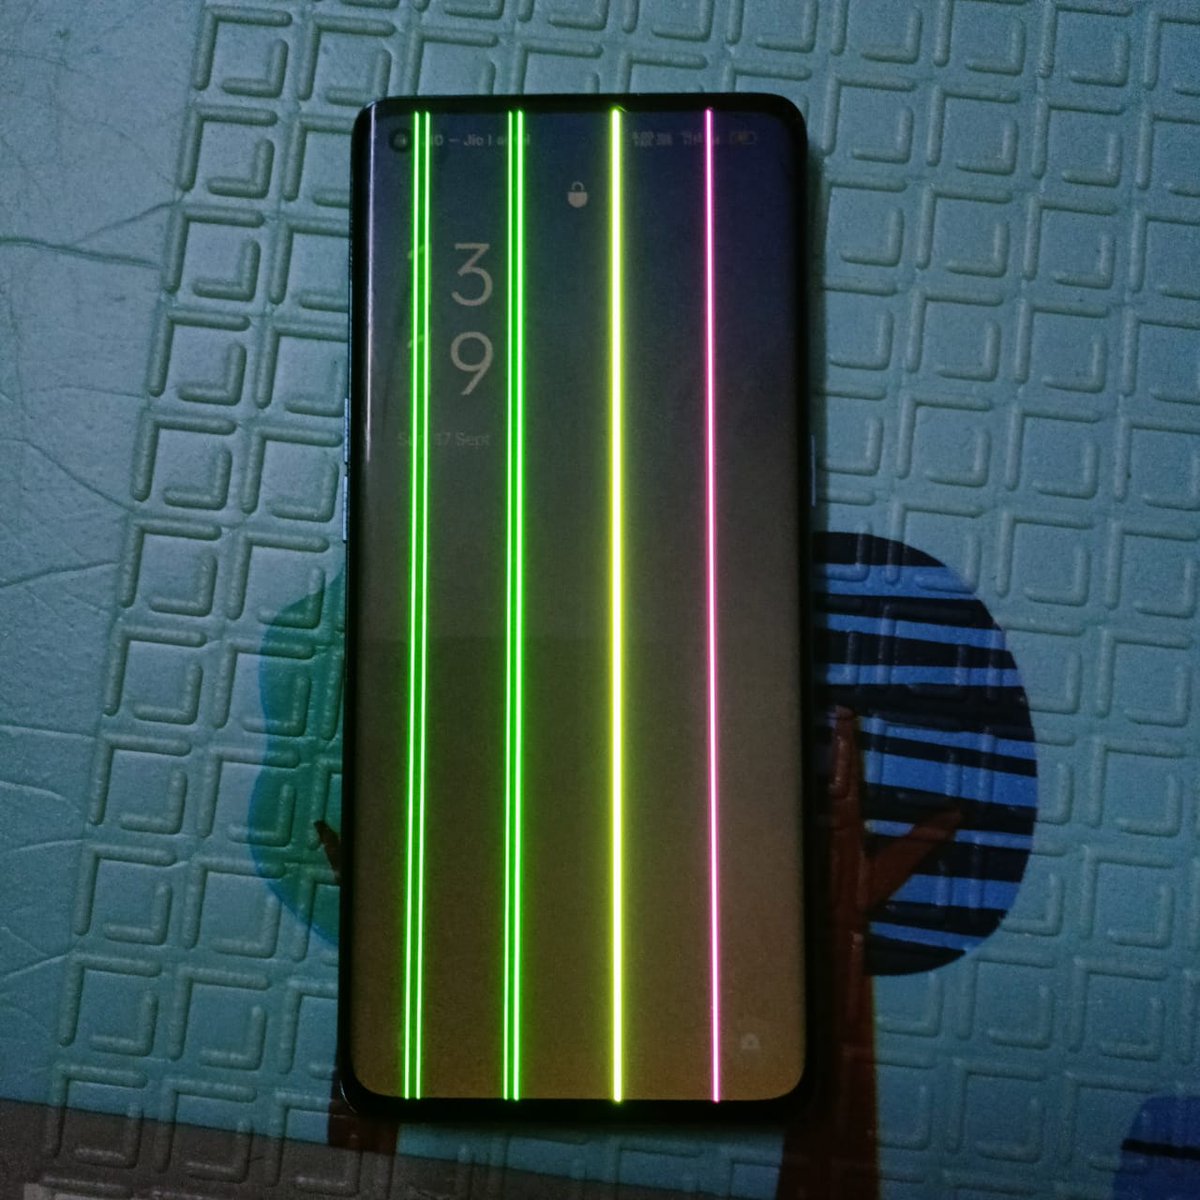 Attention oppo Reno5 pro users on Android 13! After the recent update, a mysterious green line has appeared on my screen, and I'm not alone! Many others are facing the same issue.

@OPPOIndia & @oppo, please look into this and provide a fix ASAP! #OppoReno5pro

#GreenLinelssue'